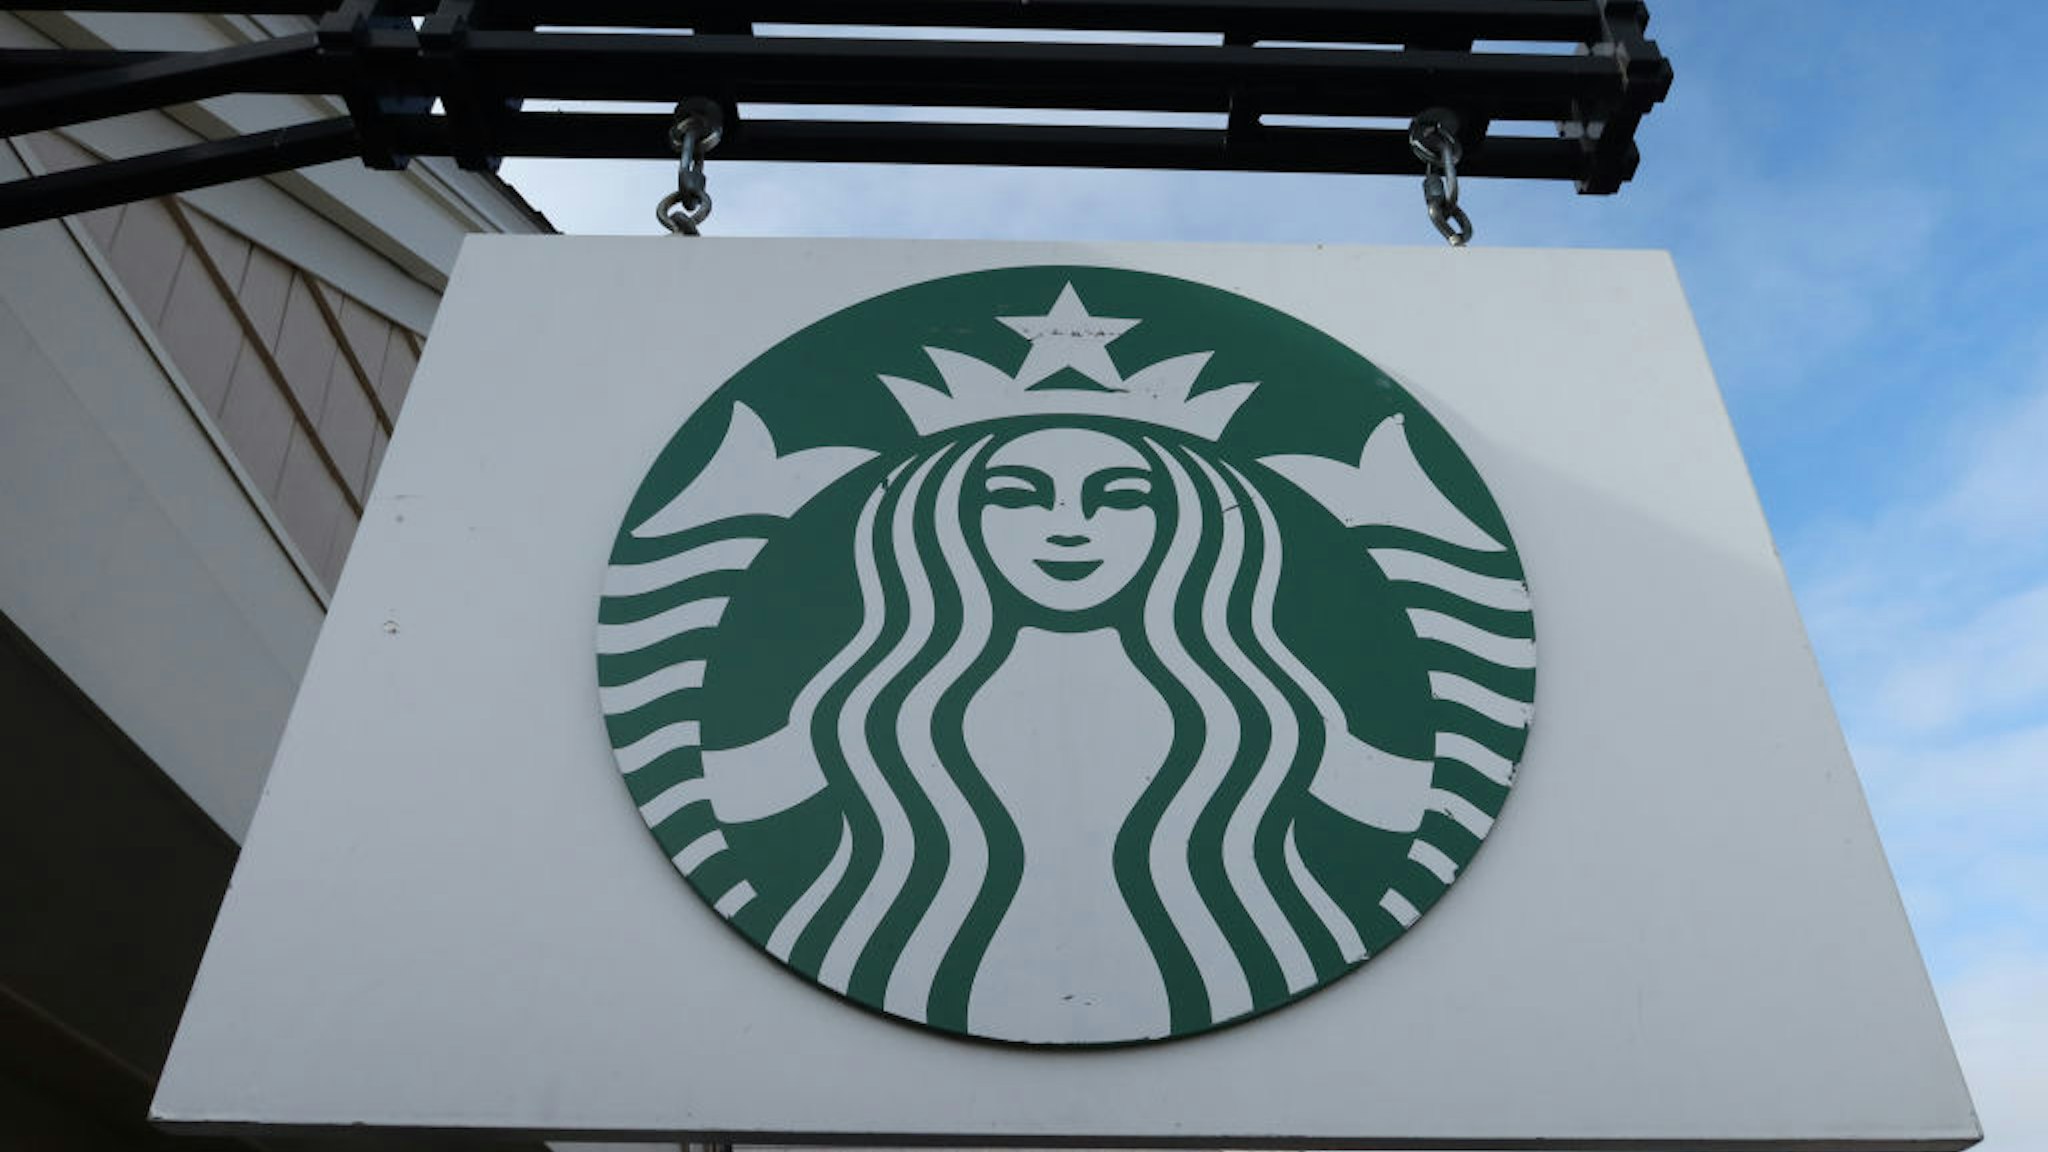 A Starbucks sign hangs in front of their store at the Woodbury Common Premium Outlets shopping mall on November 17, 2019 in Central Valley, New York.